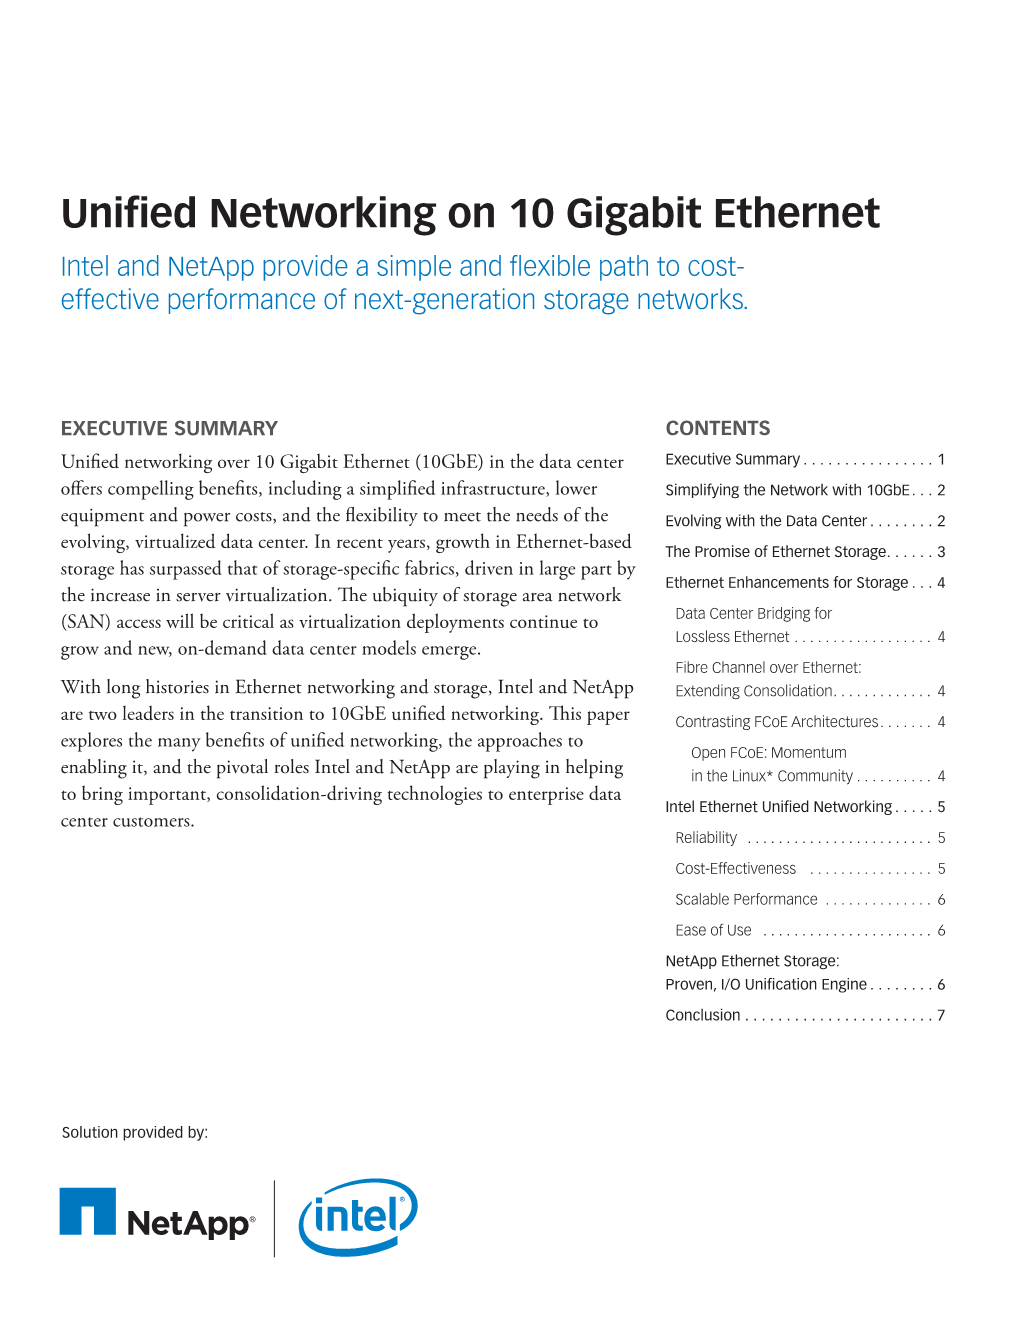 Unified Networking on 10 Gigabit Ethernet: Intel and Netapp Provide